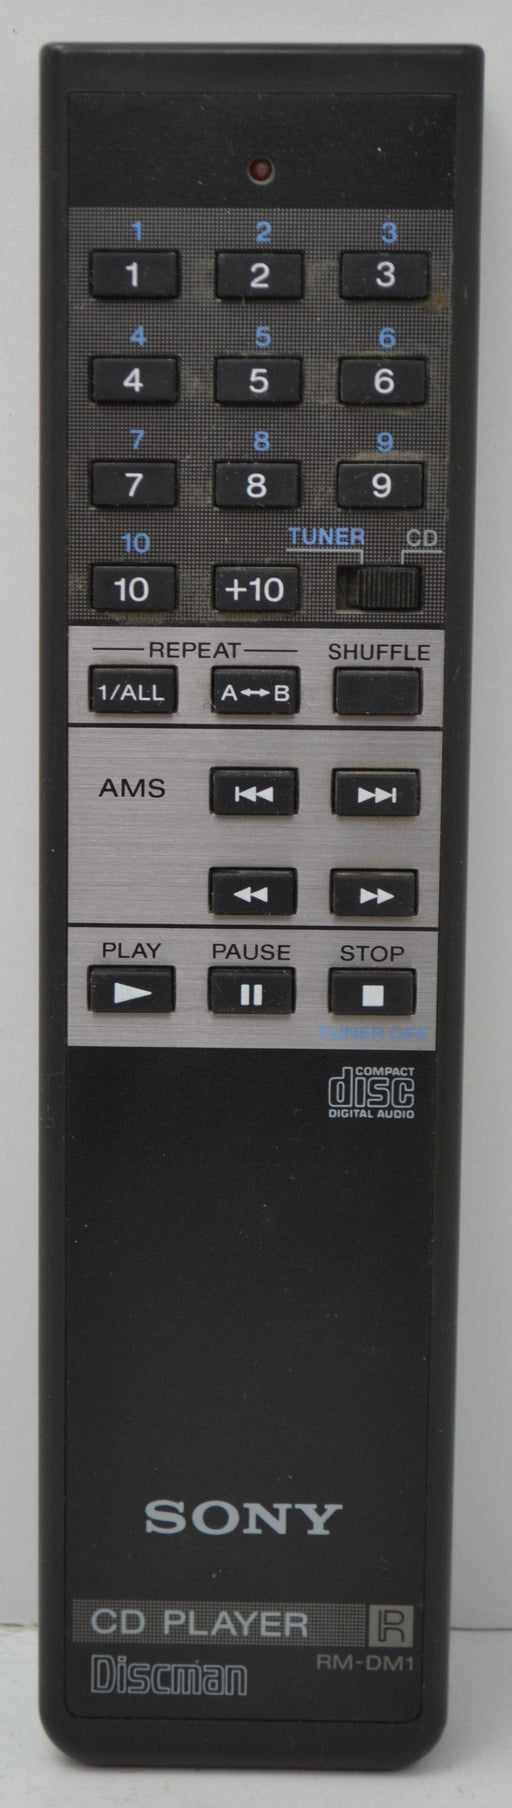 Sony RM-DM1 Remote Control for CD Player Discman-Remote-SpenCertified-refurbished-vintage-electonics